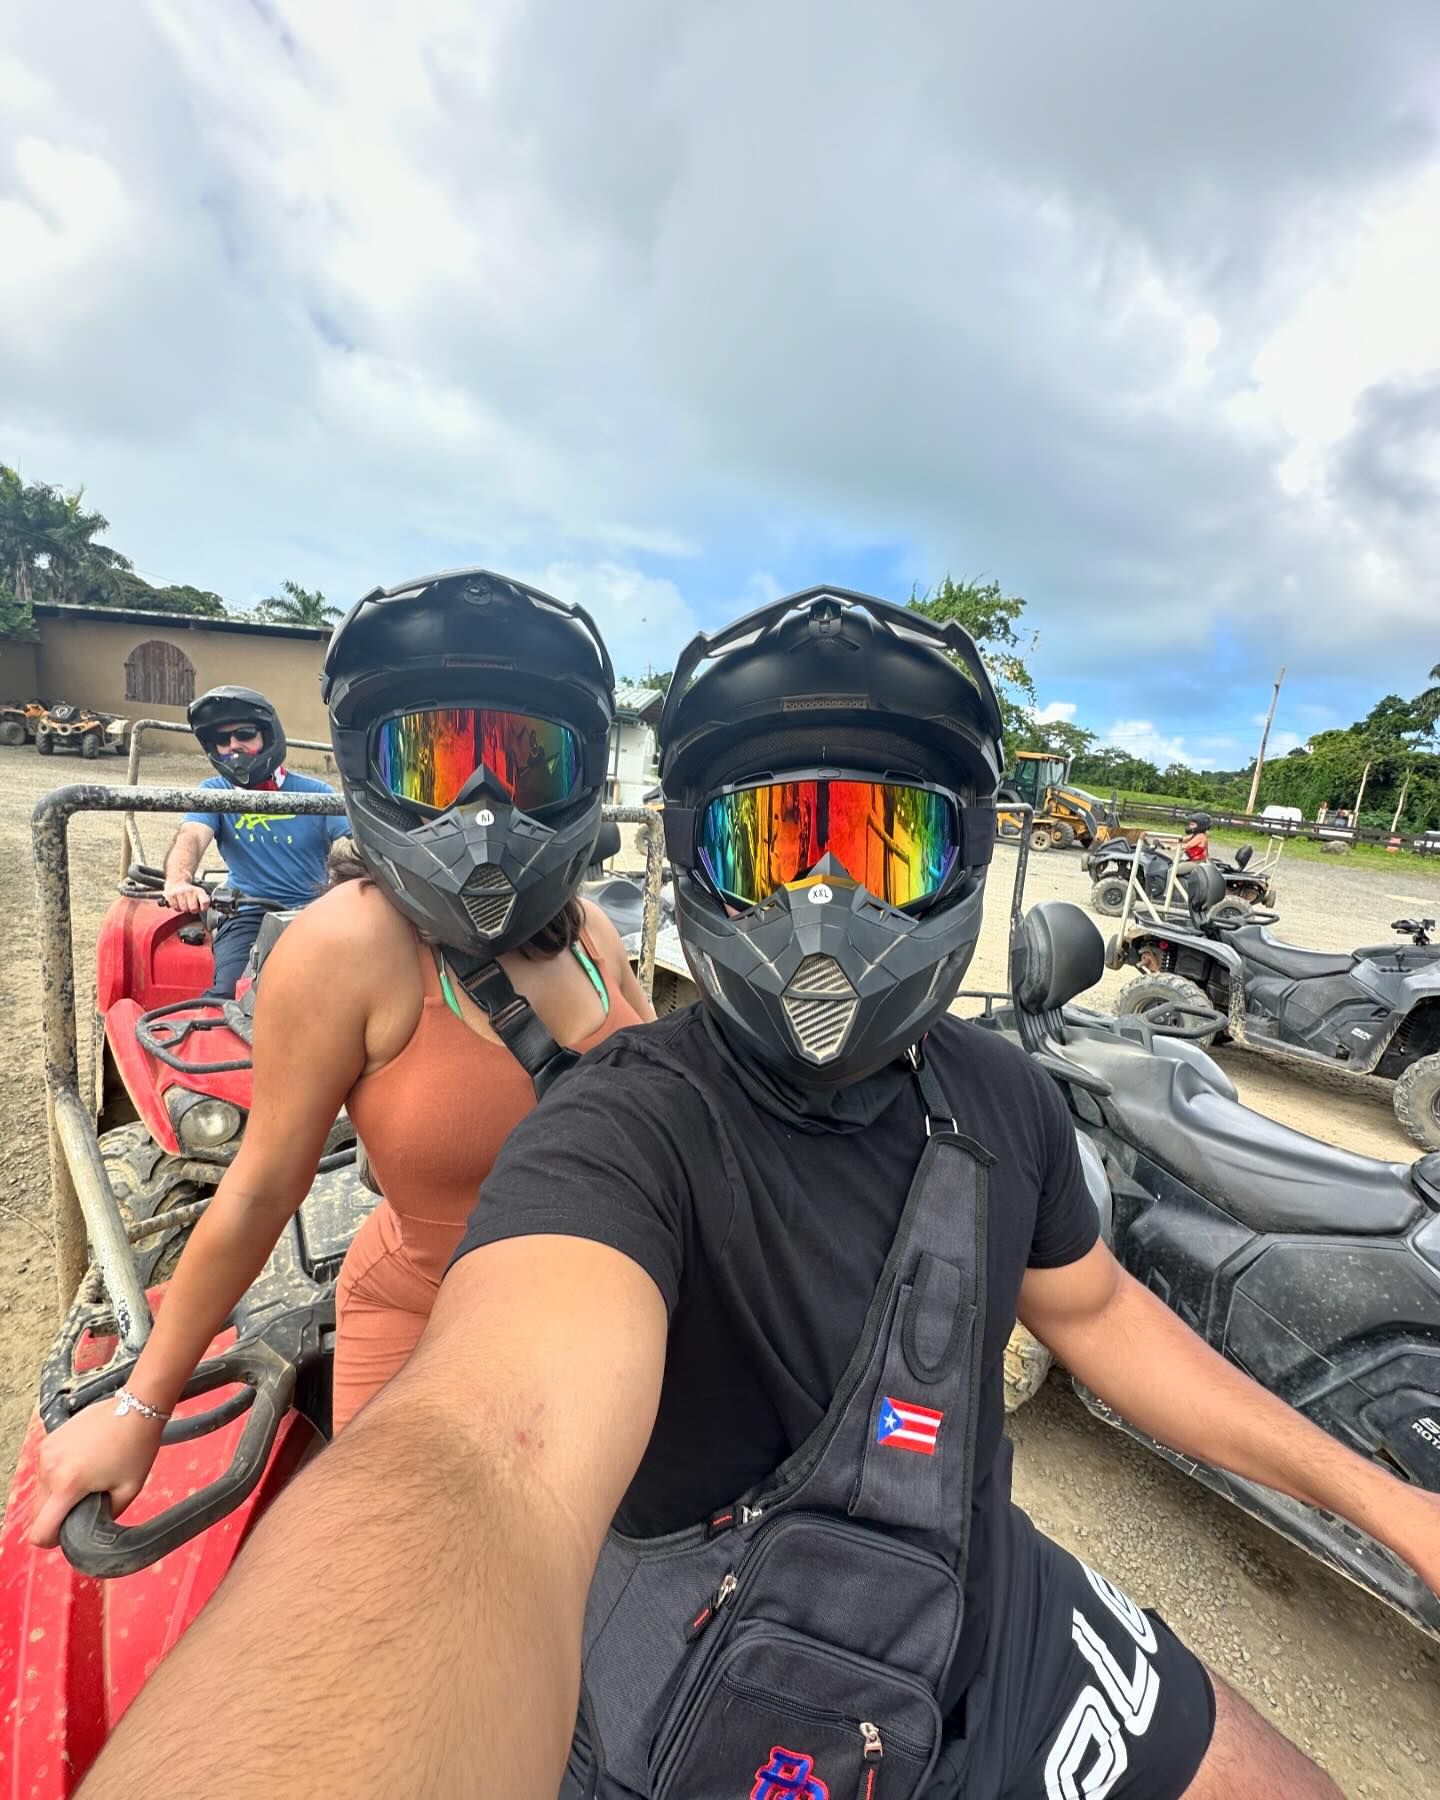 First time in Puerto Rico🕺🇵🇷 #couple #puertorico #goals